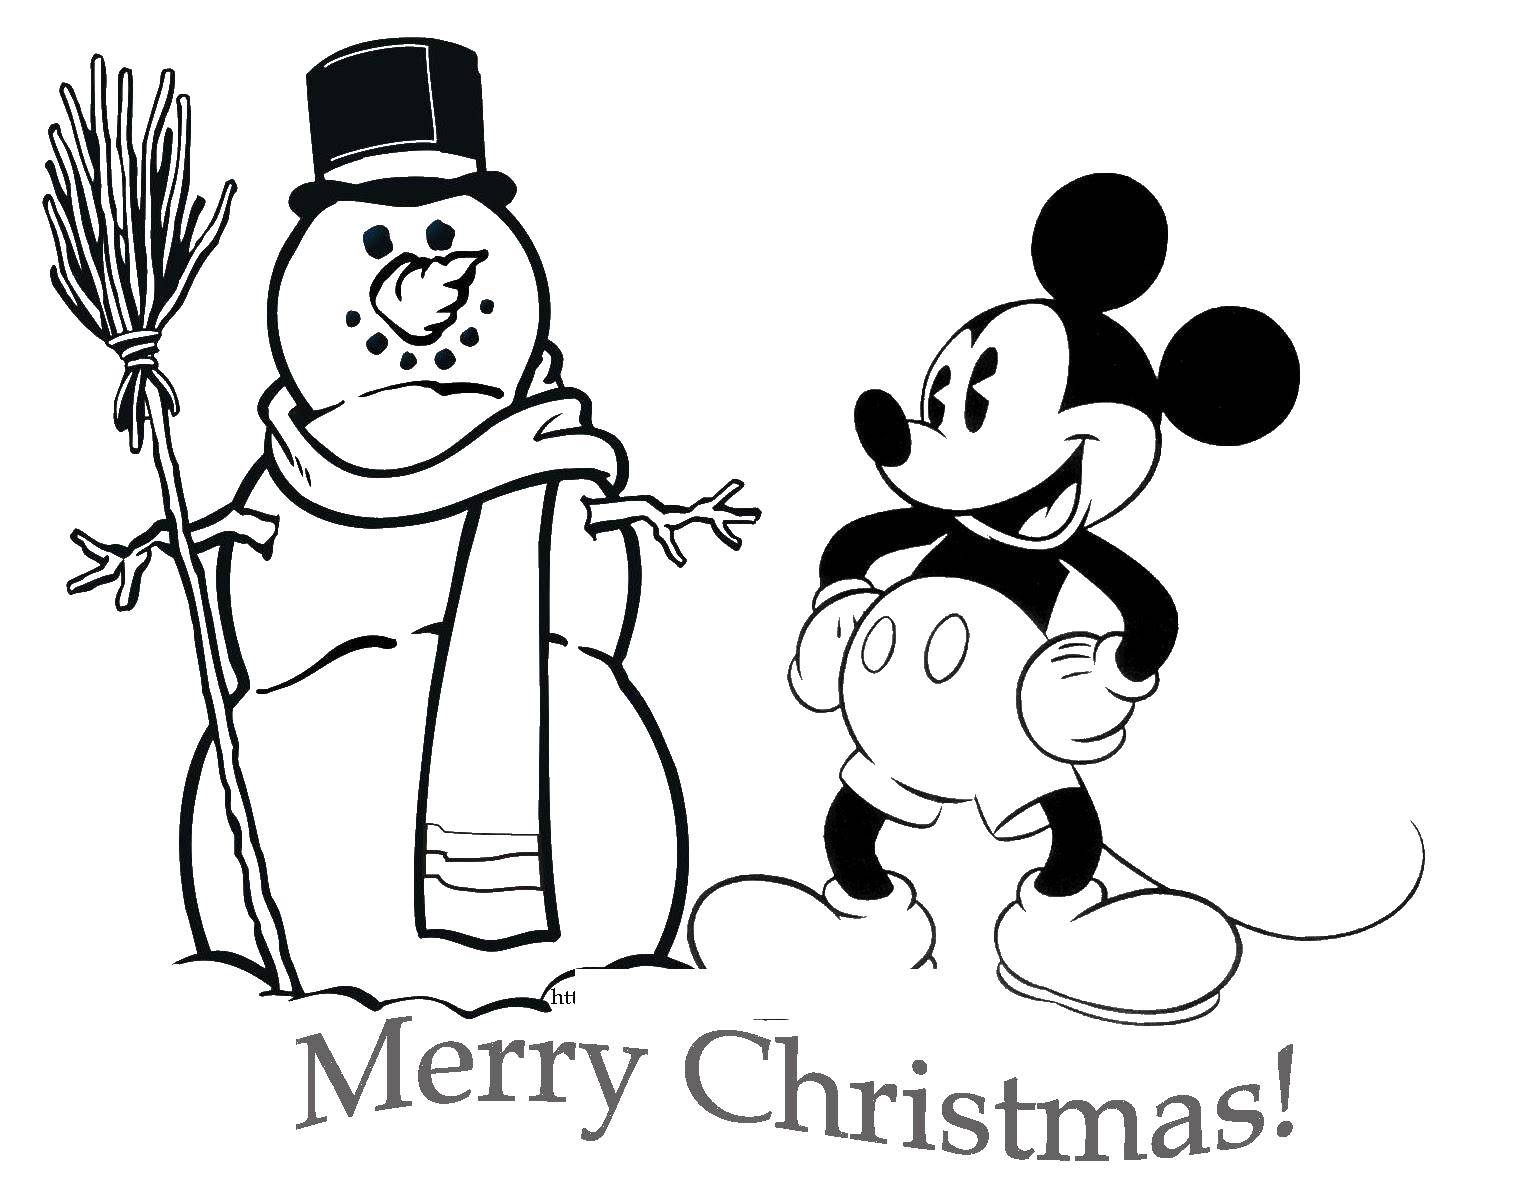 Coloring Greetings at Christmas from Mickey mouse. Category Christmas. Tags:  Mickymaus, , .